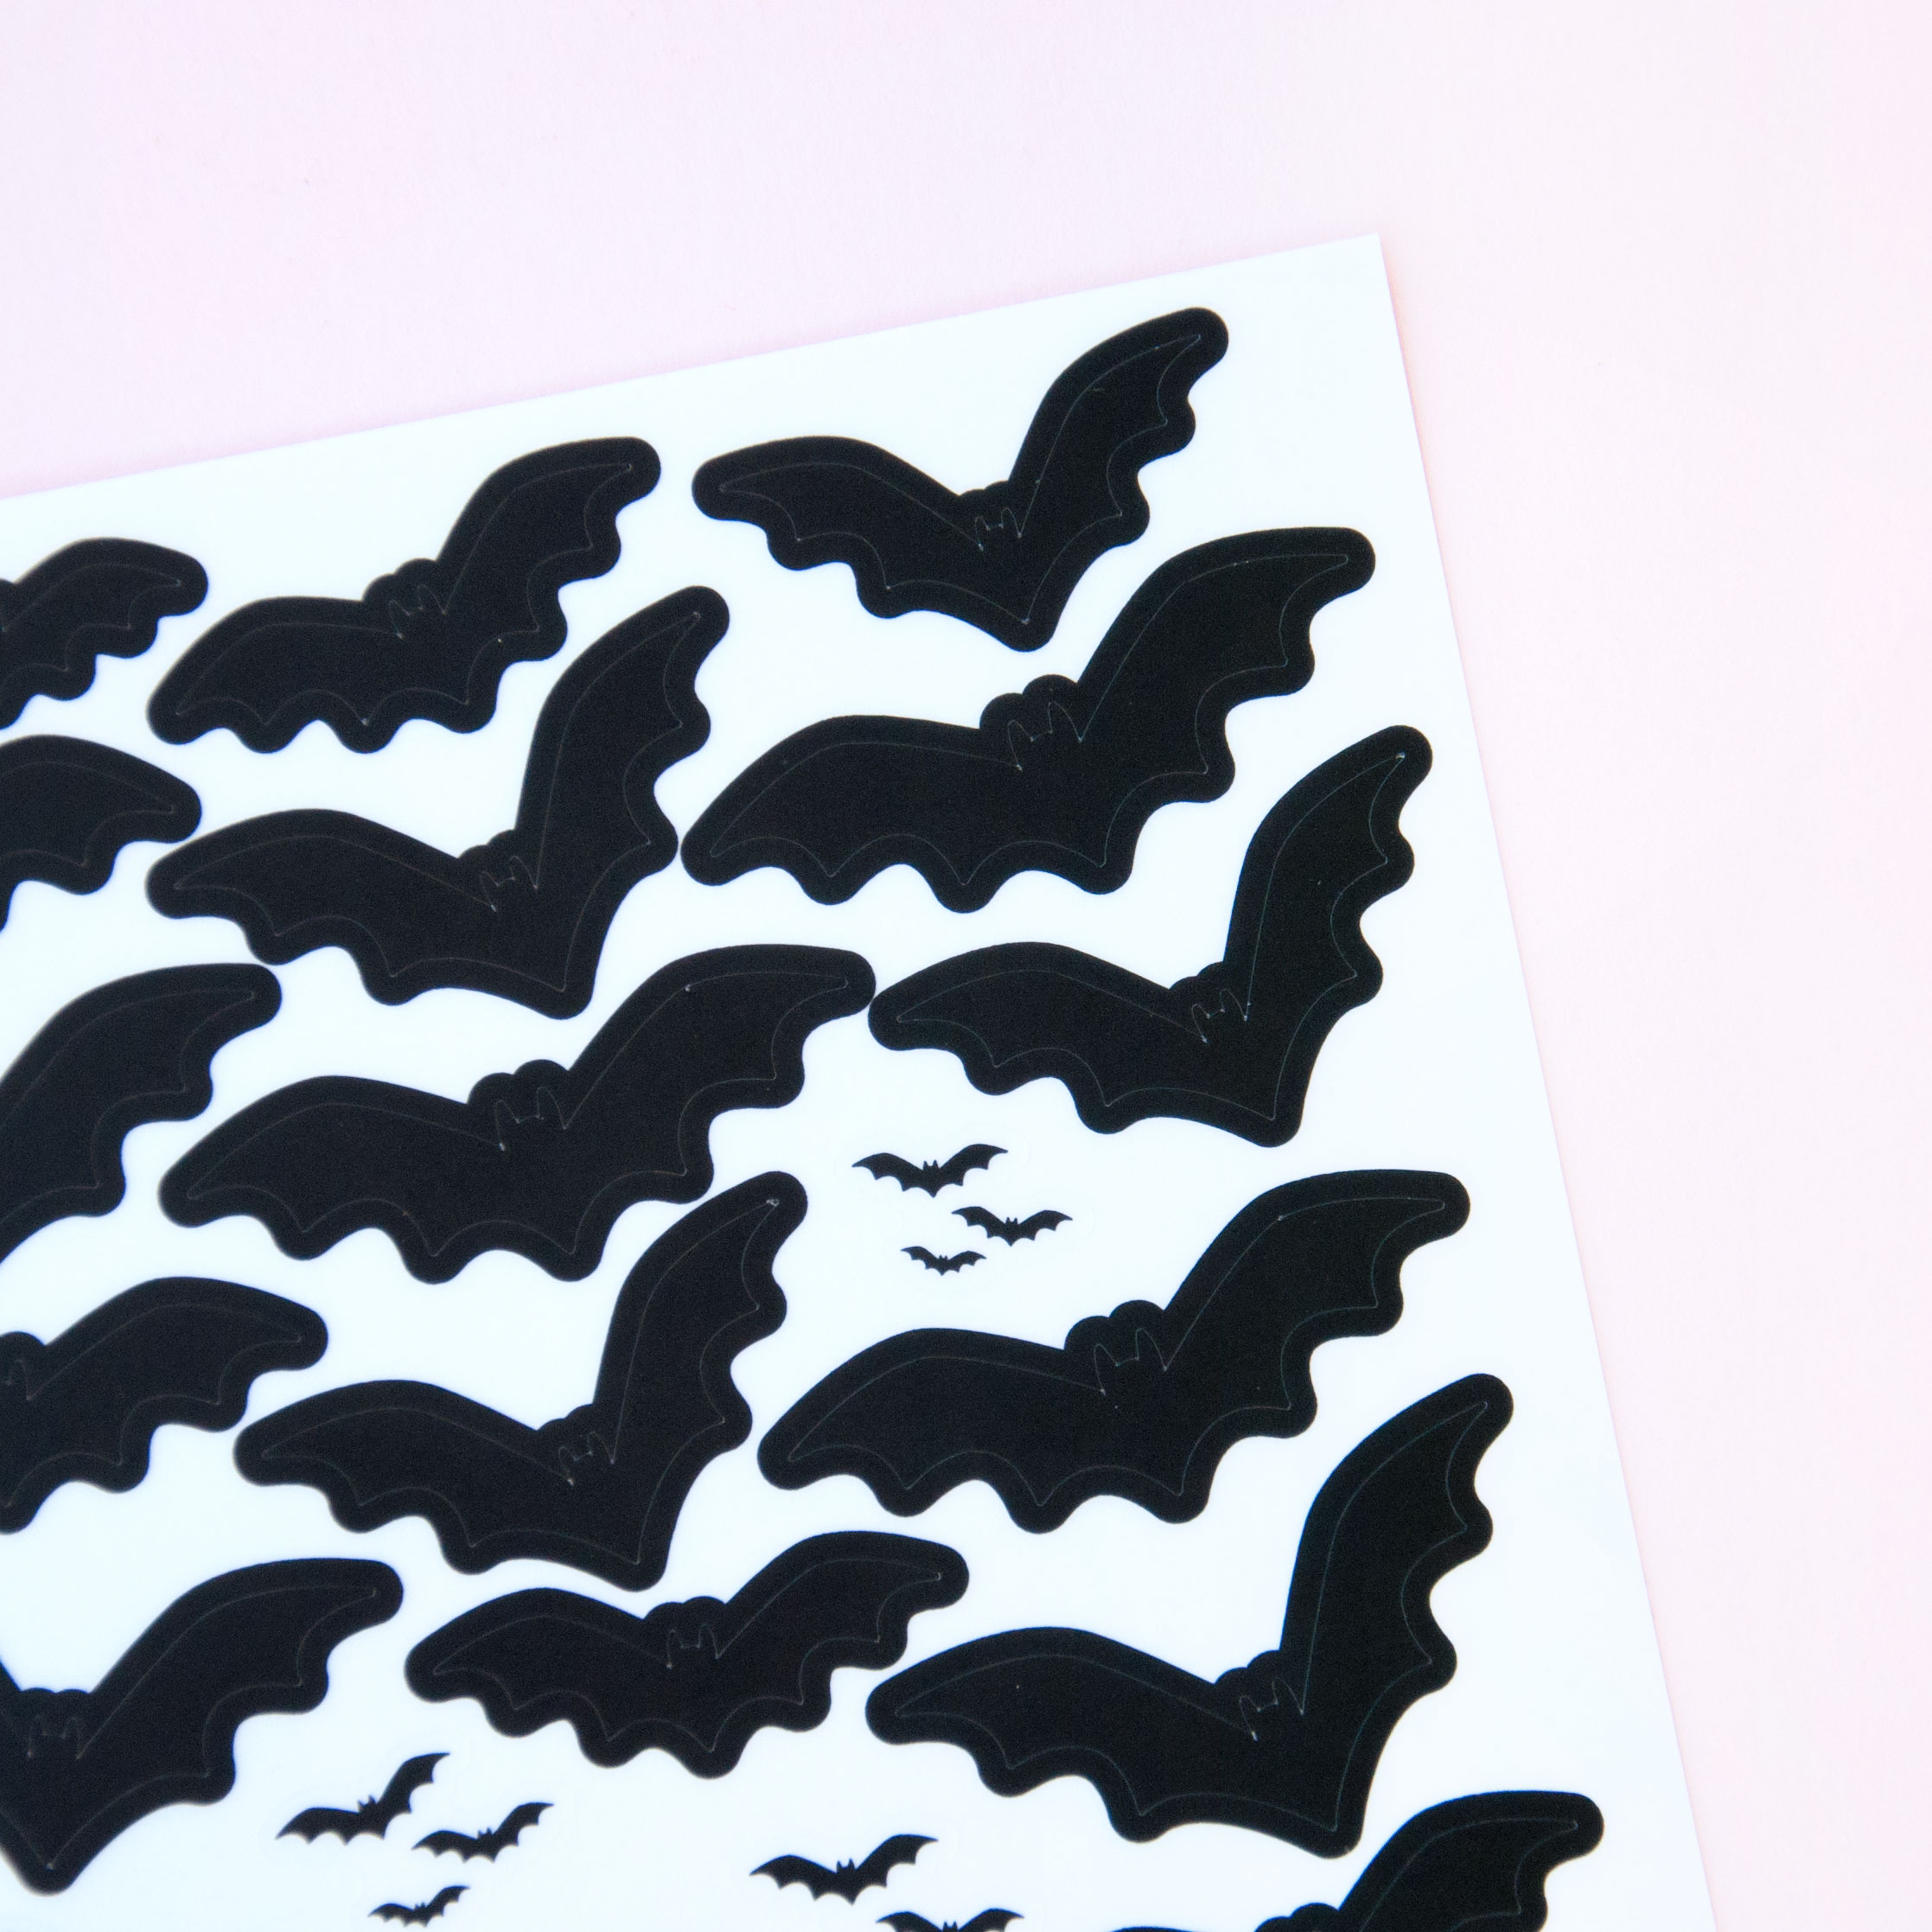 Bats and Haunted Houses Sticker Sheet - Design by Willwa